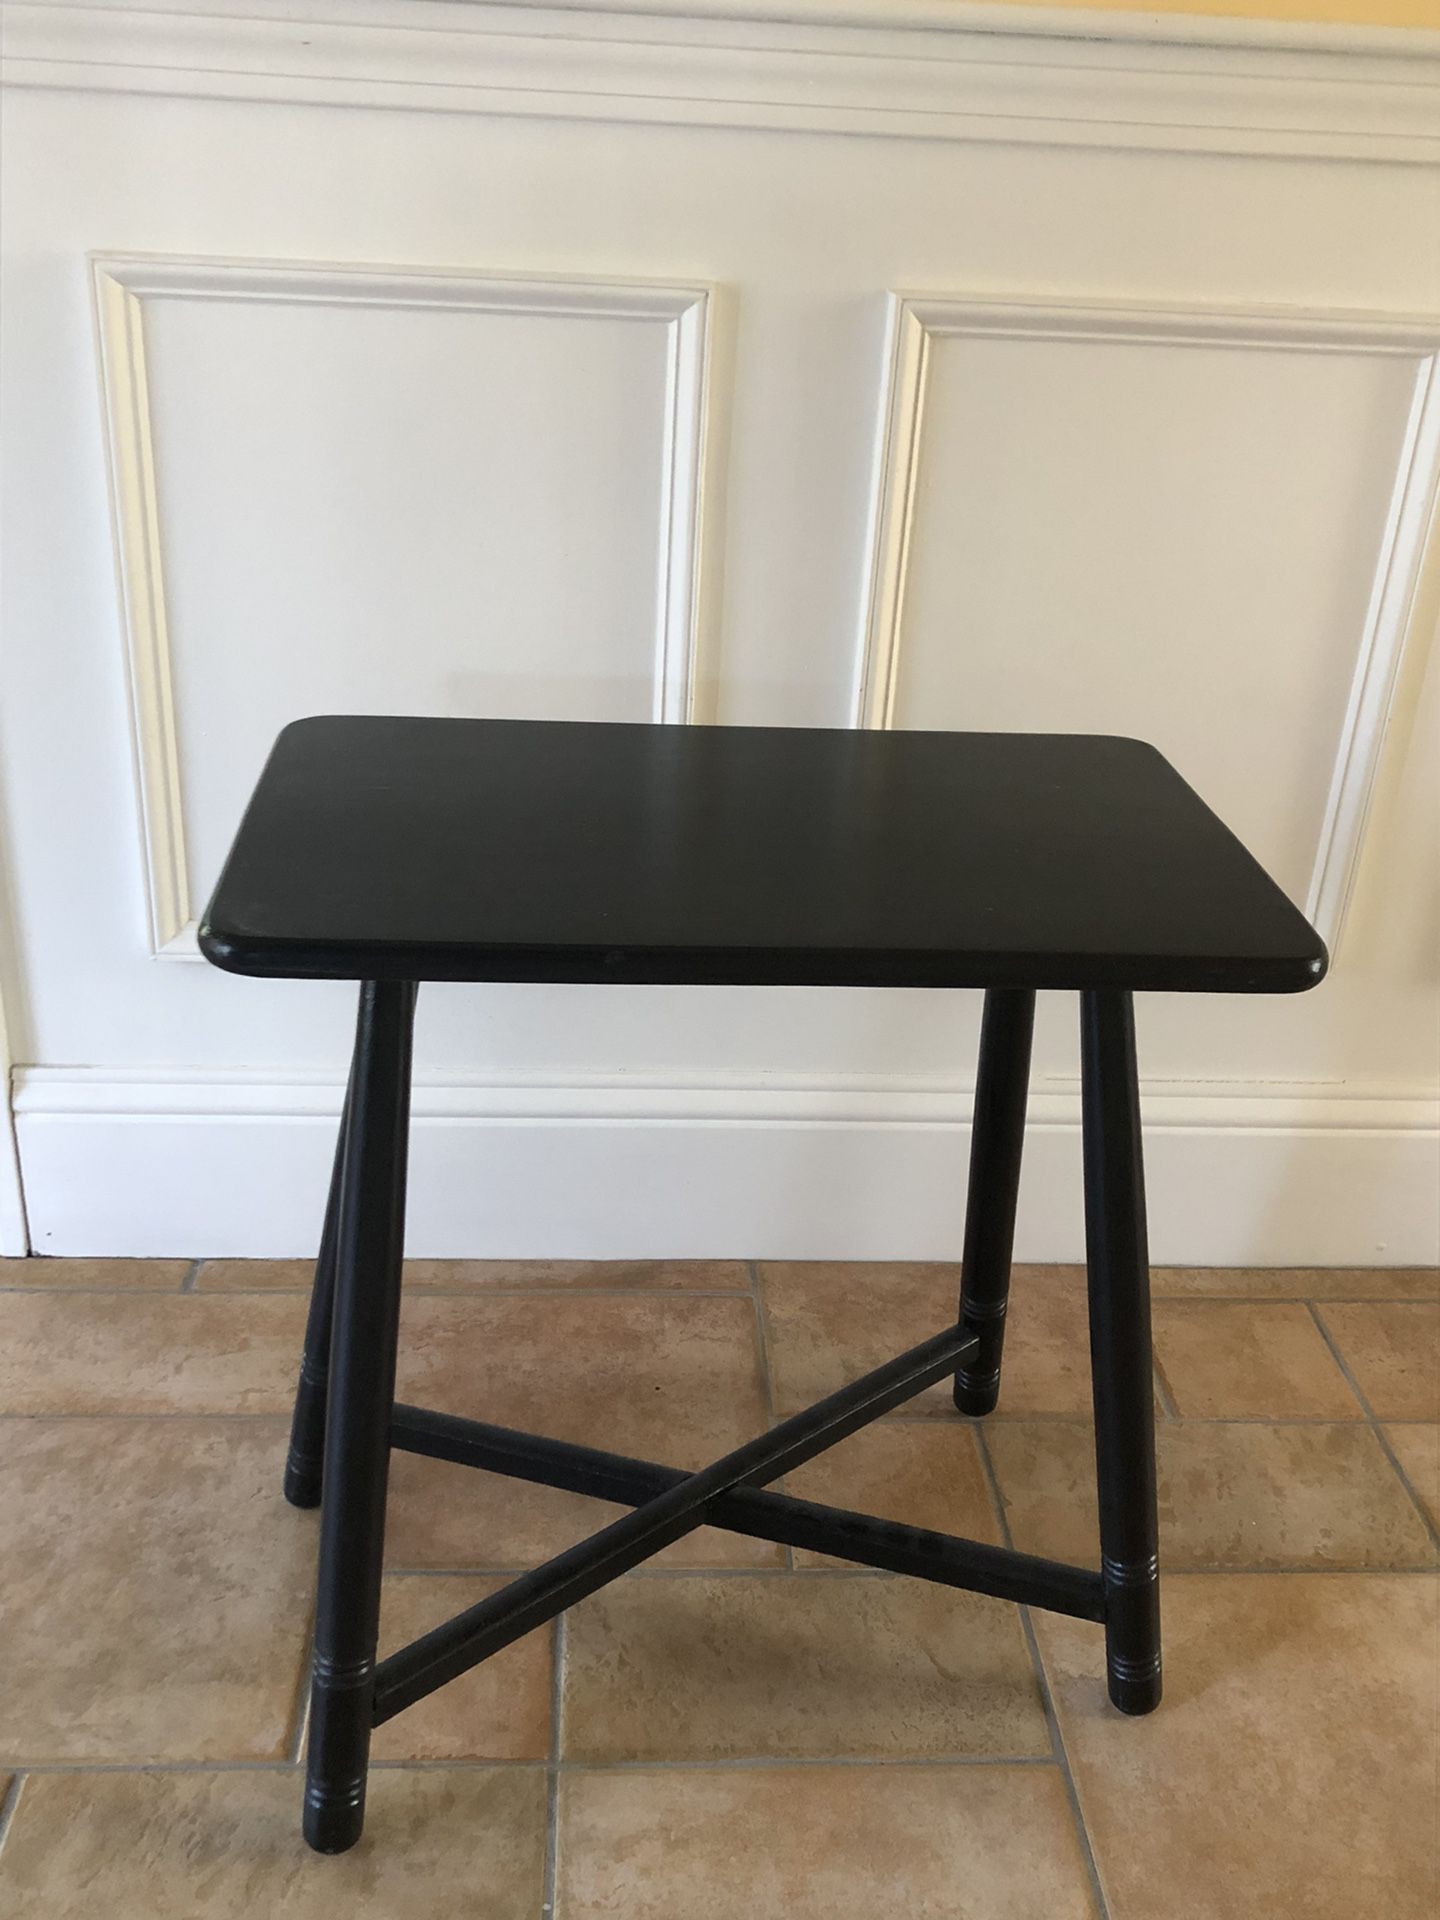 Little Black Table - Or- Plant Stand